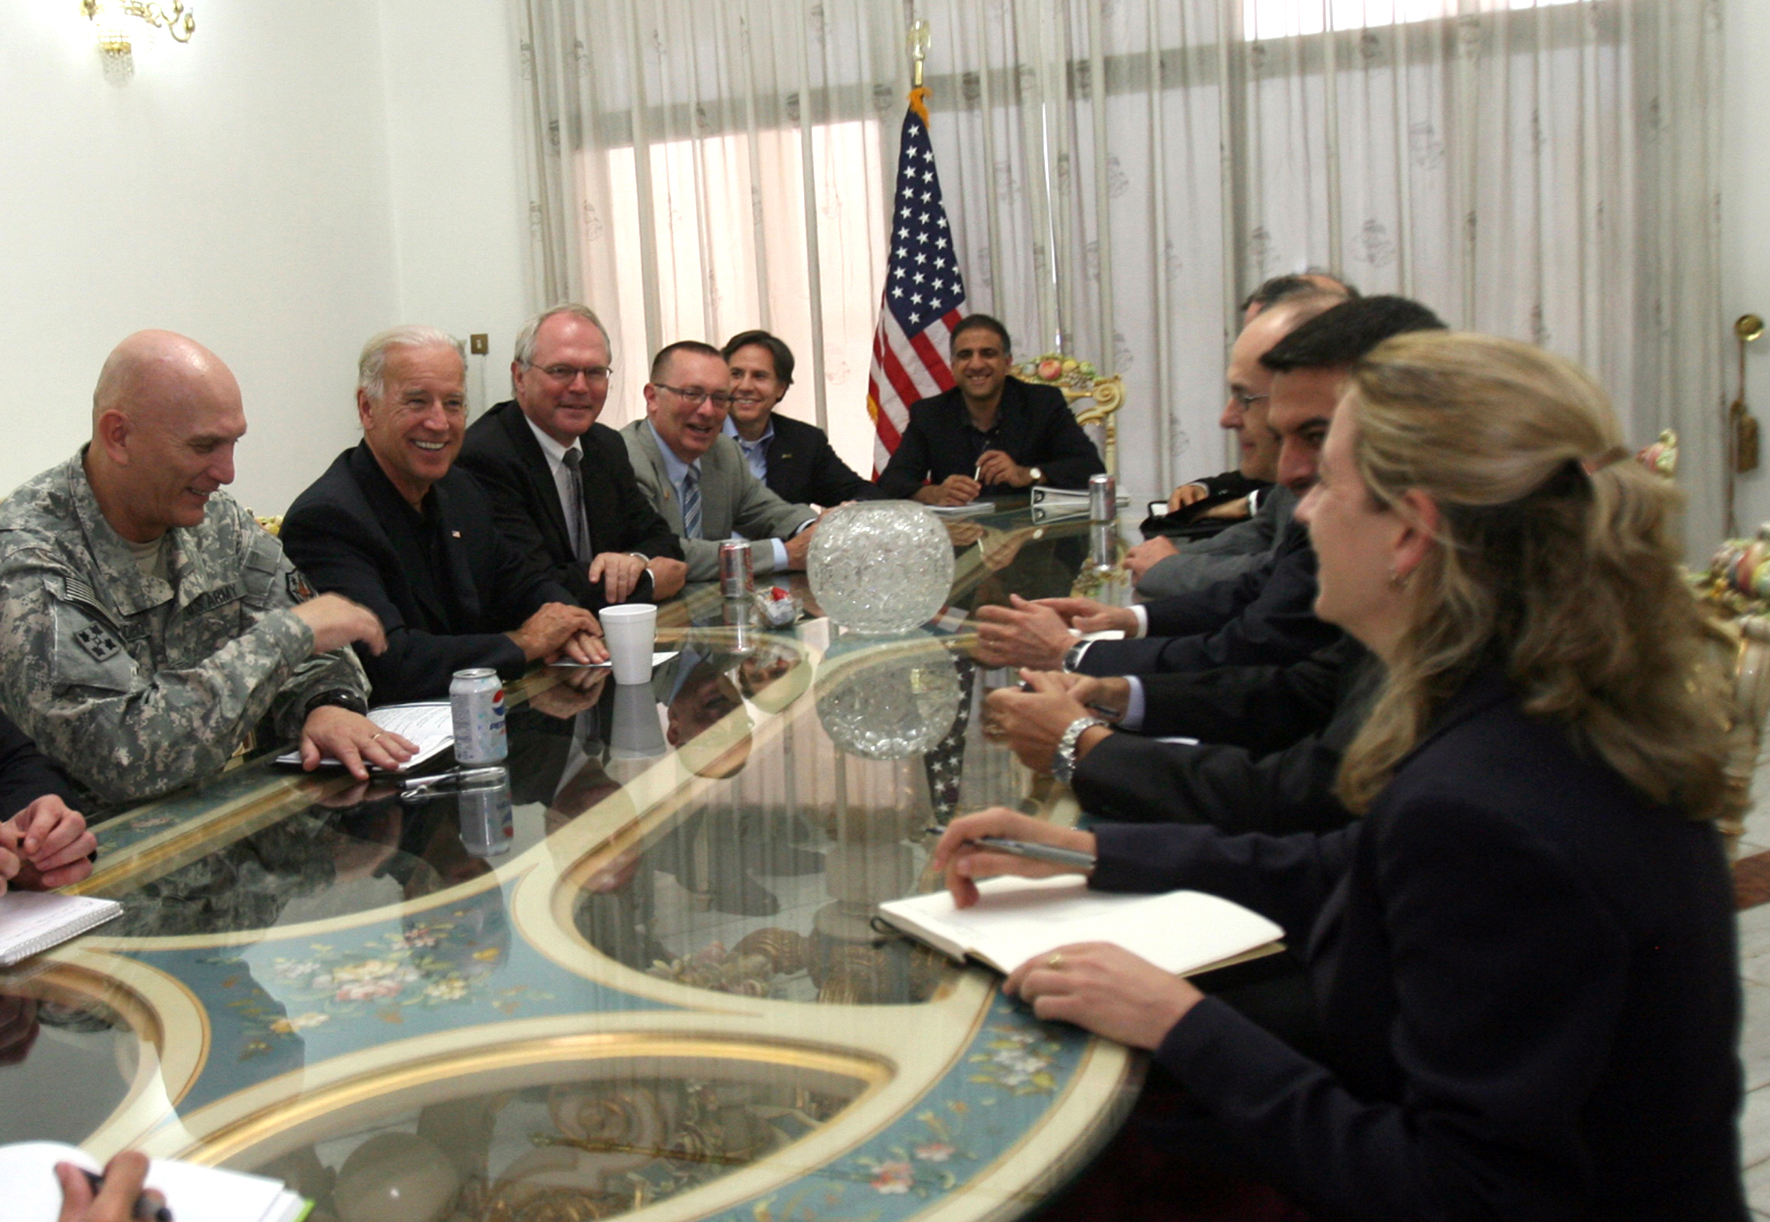 PHOTO: Vice President Joe Biden sits along side Gen. Ray Odierno and U.S. Ambassador to Iraq Christopher Hill during a meeting at the US Embassy in Baghdad, July 3, 2010.